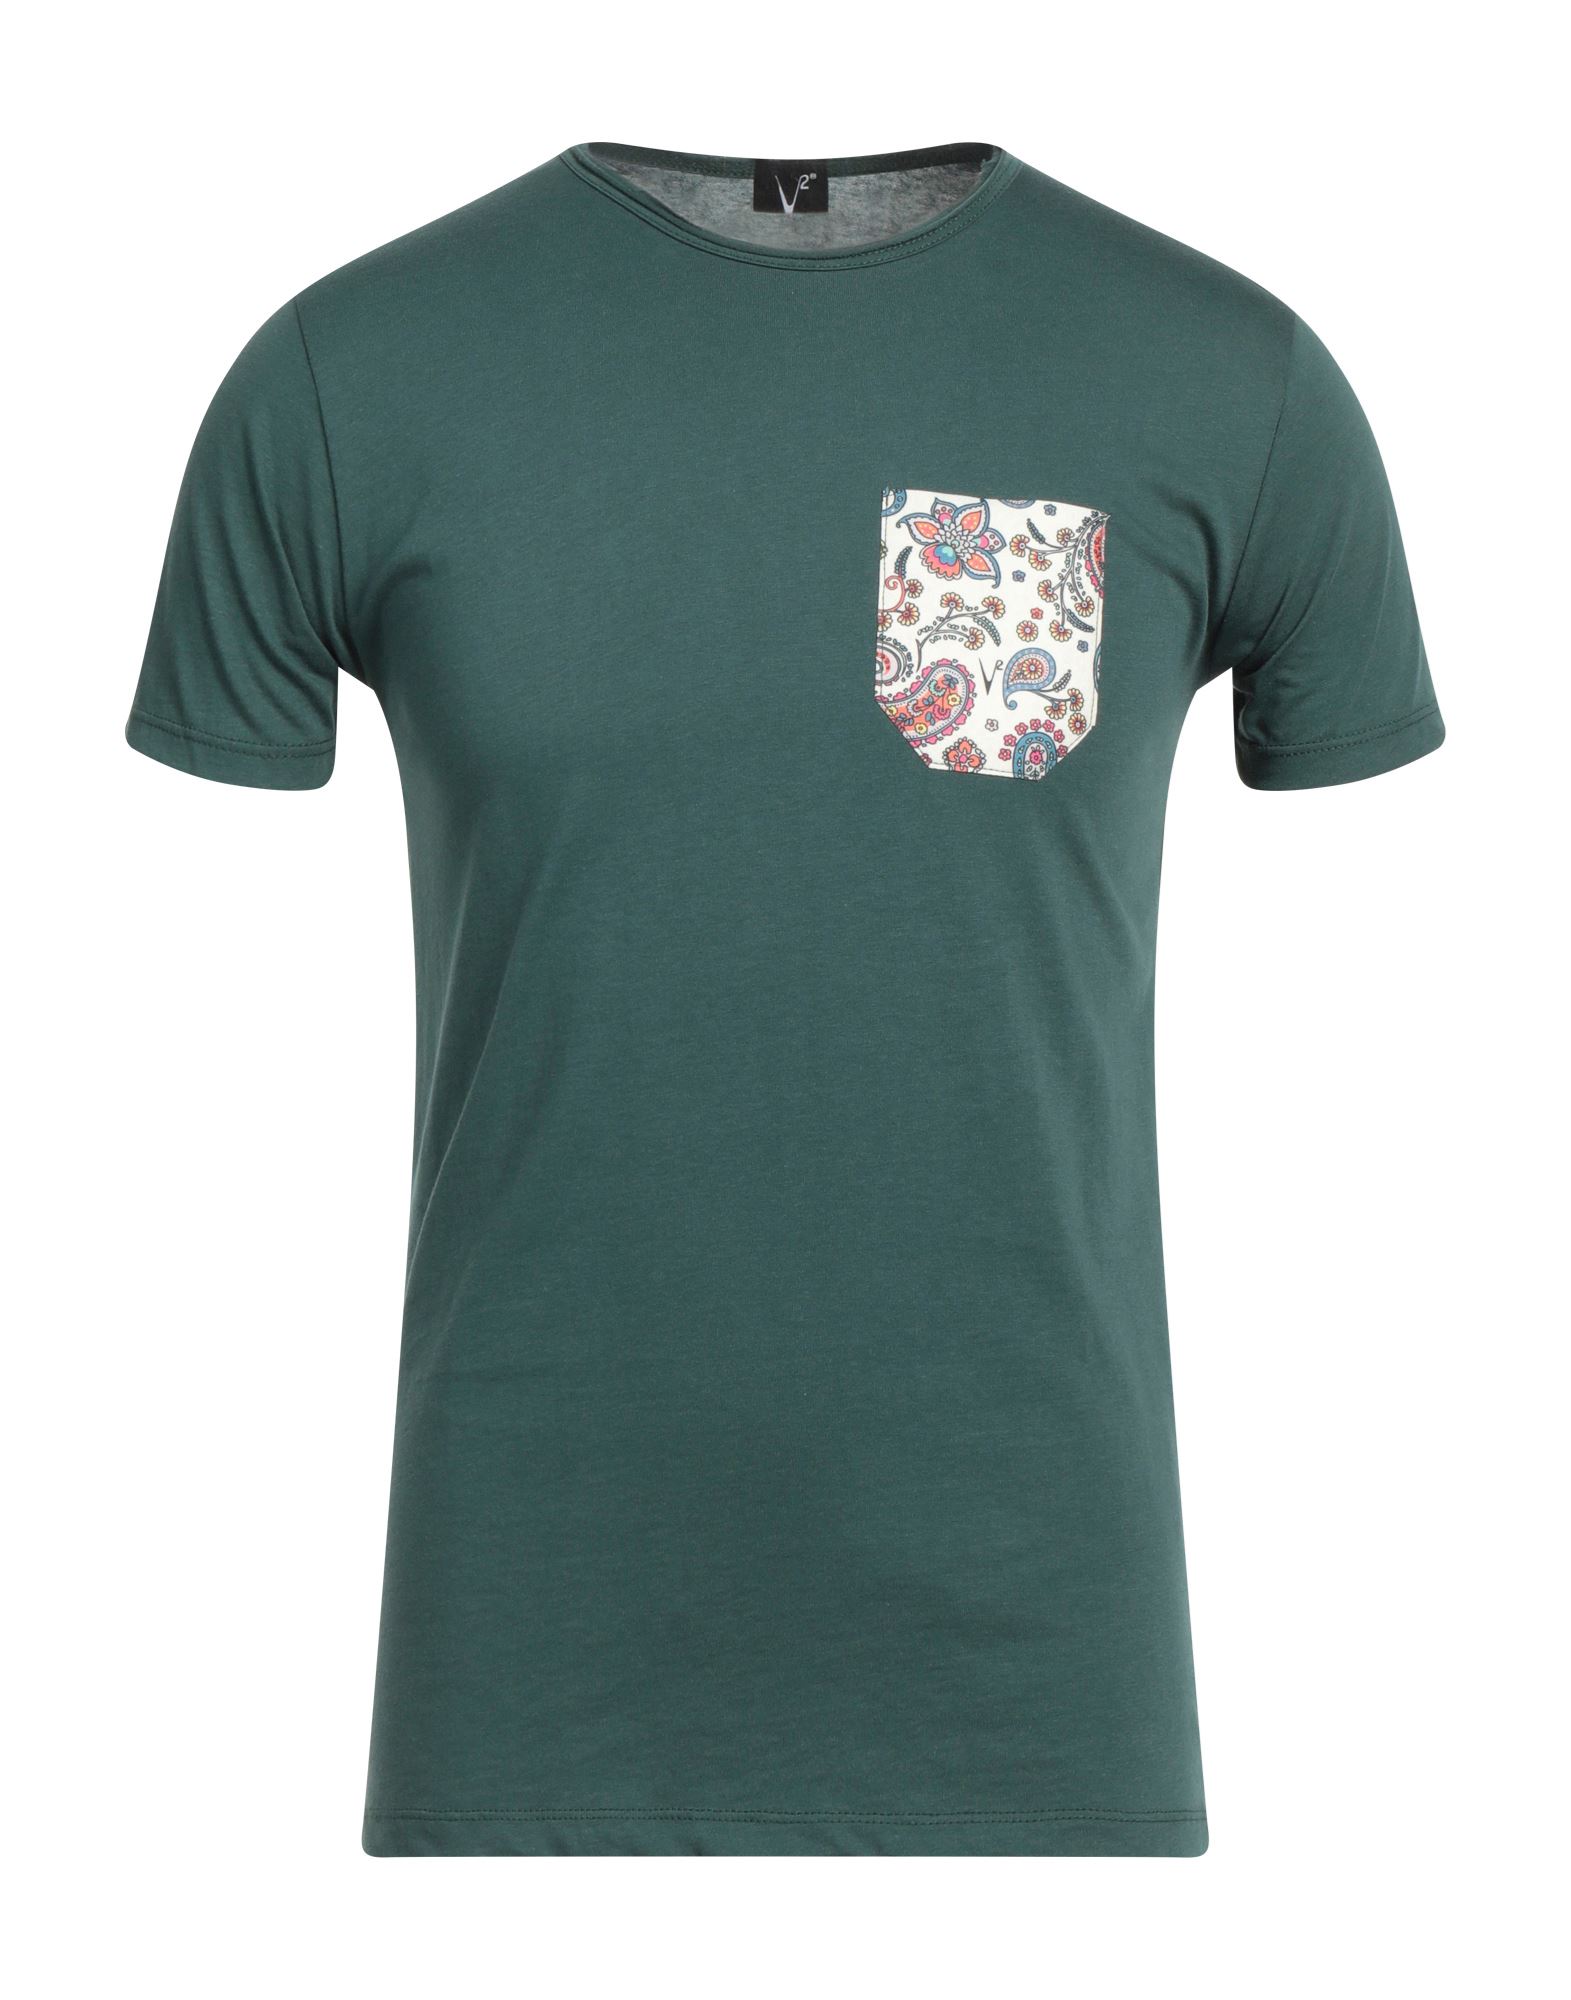 V2® Brand T-shirts In Green